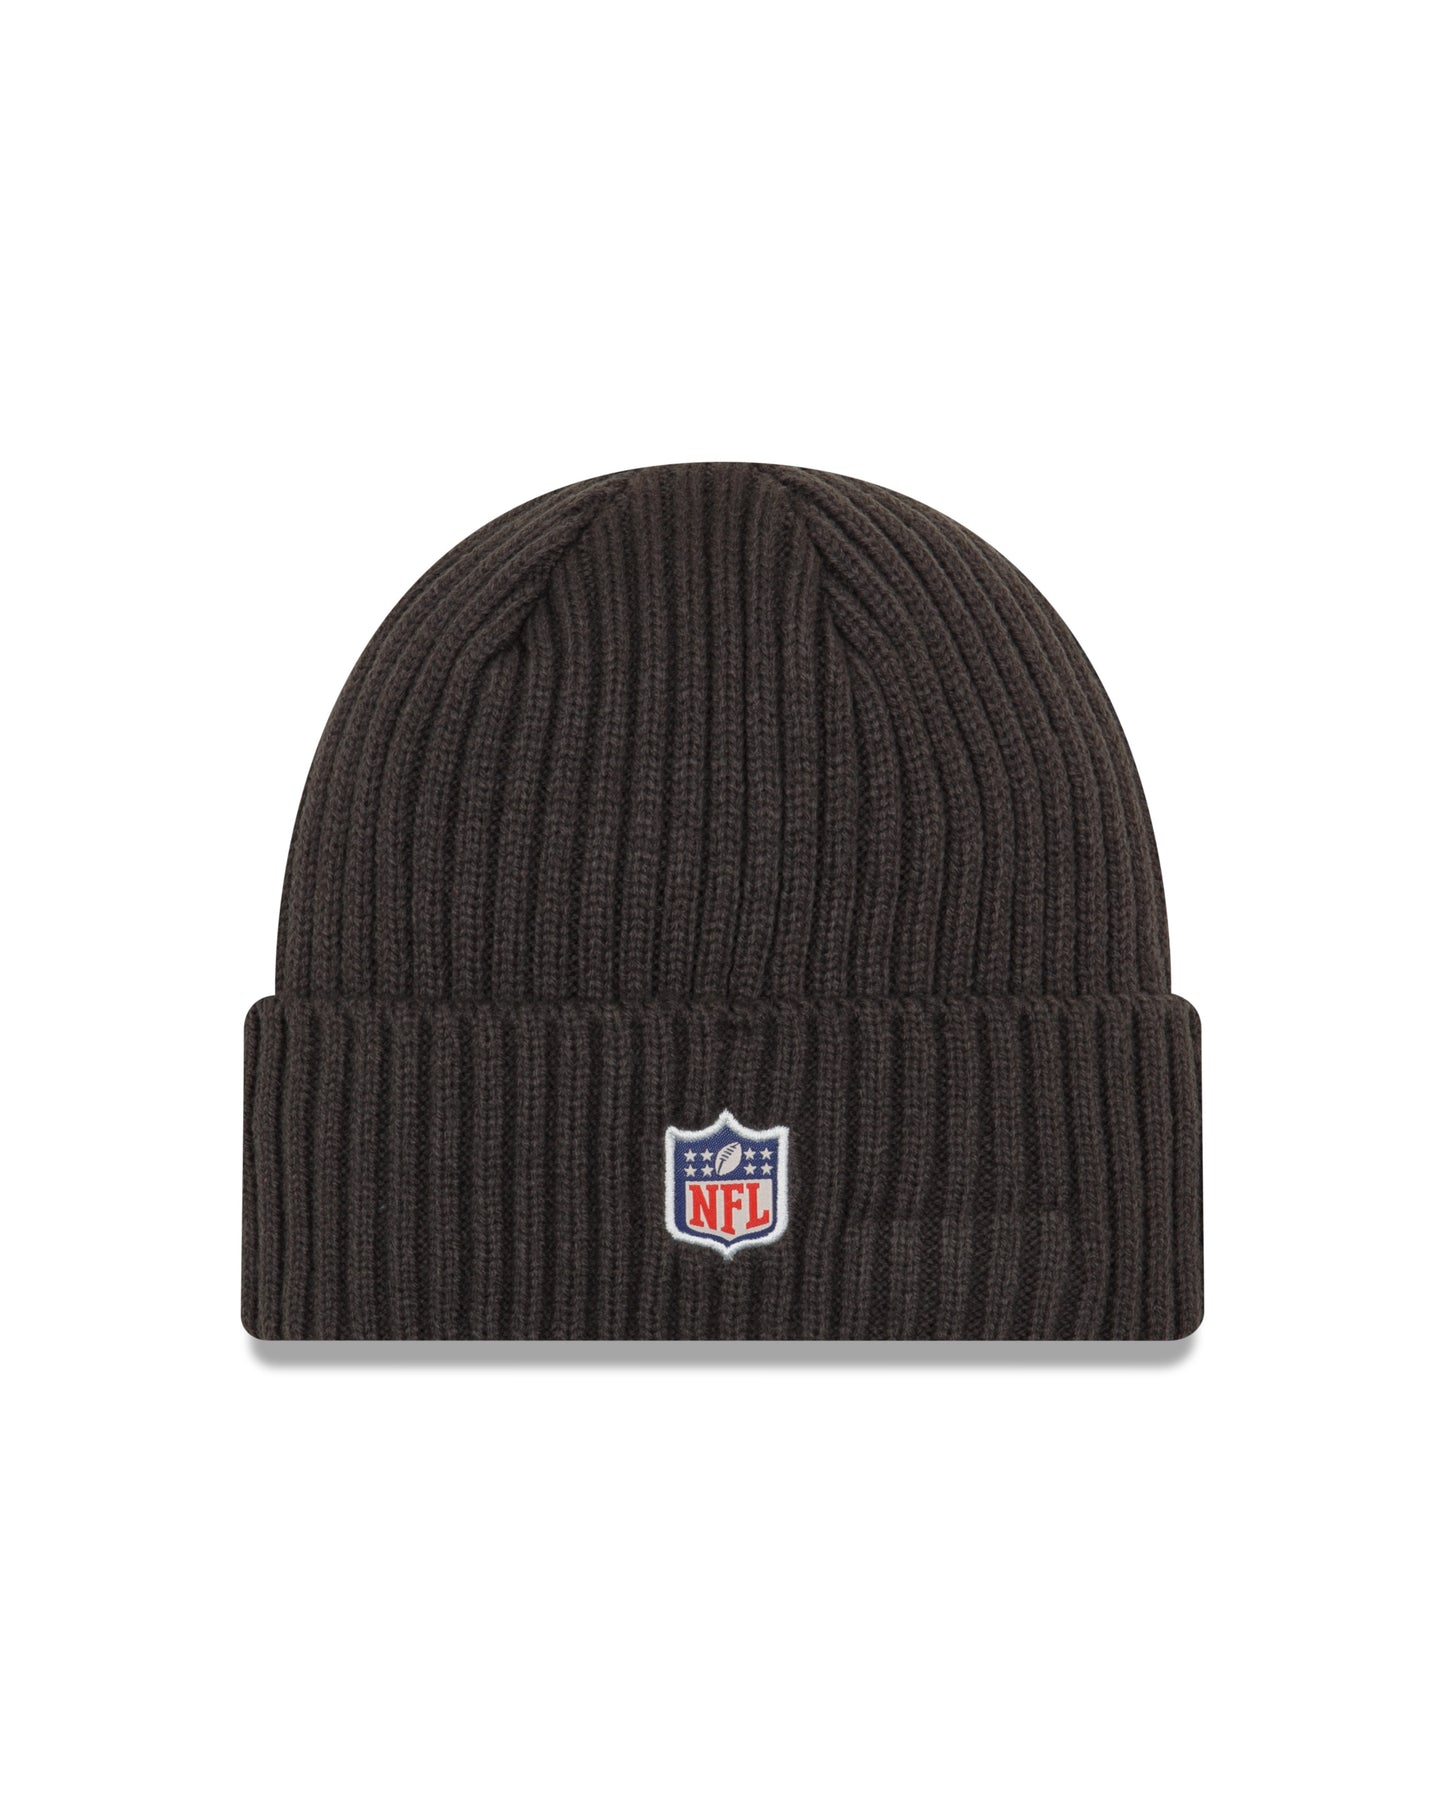 New Orleans Saints New Era Crucial Catch Cuffed Knit Hat - Gray